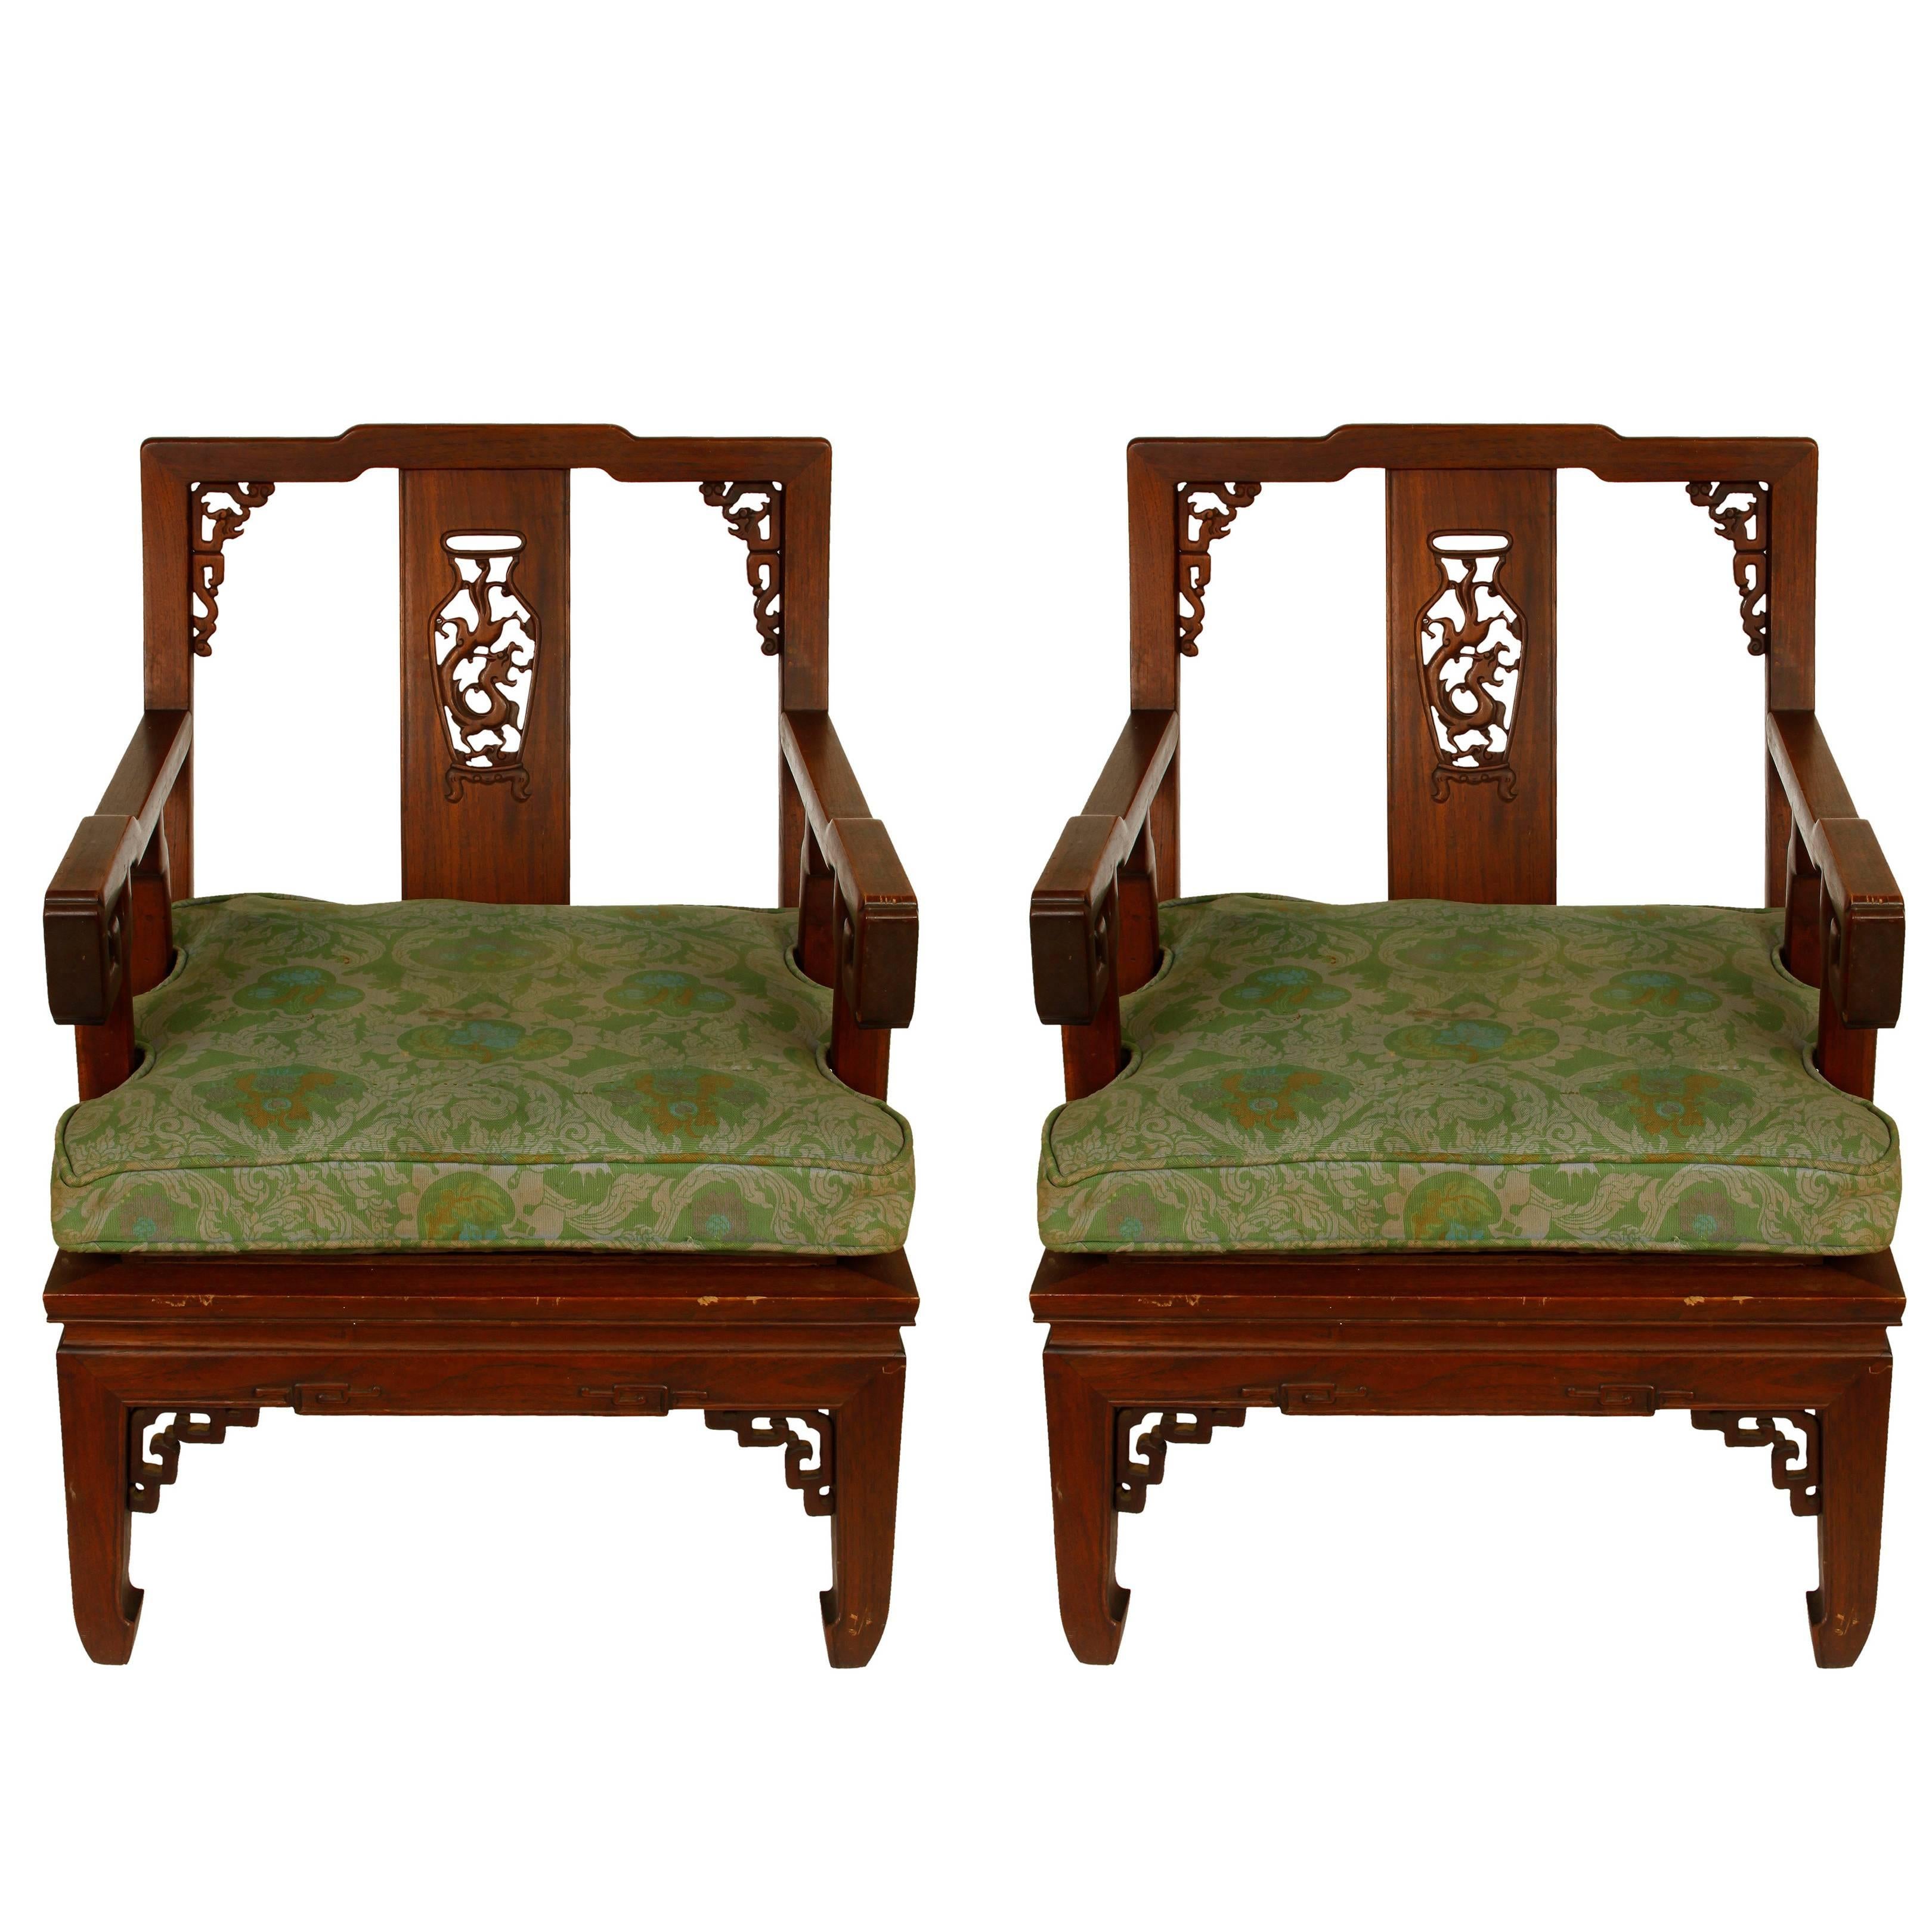 Pair of Asian Carved Hardwood Chairs